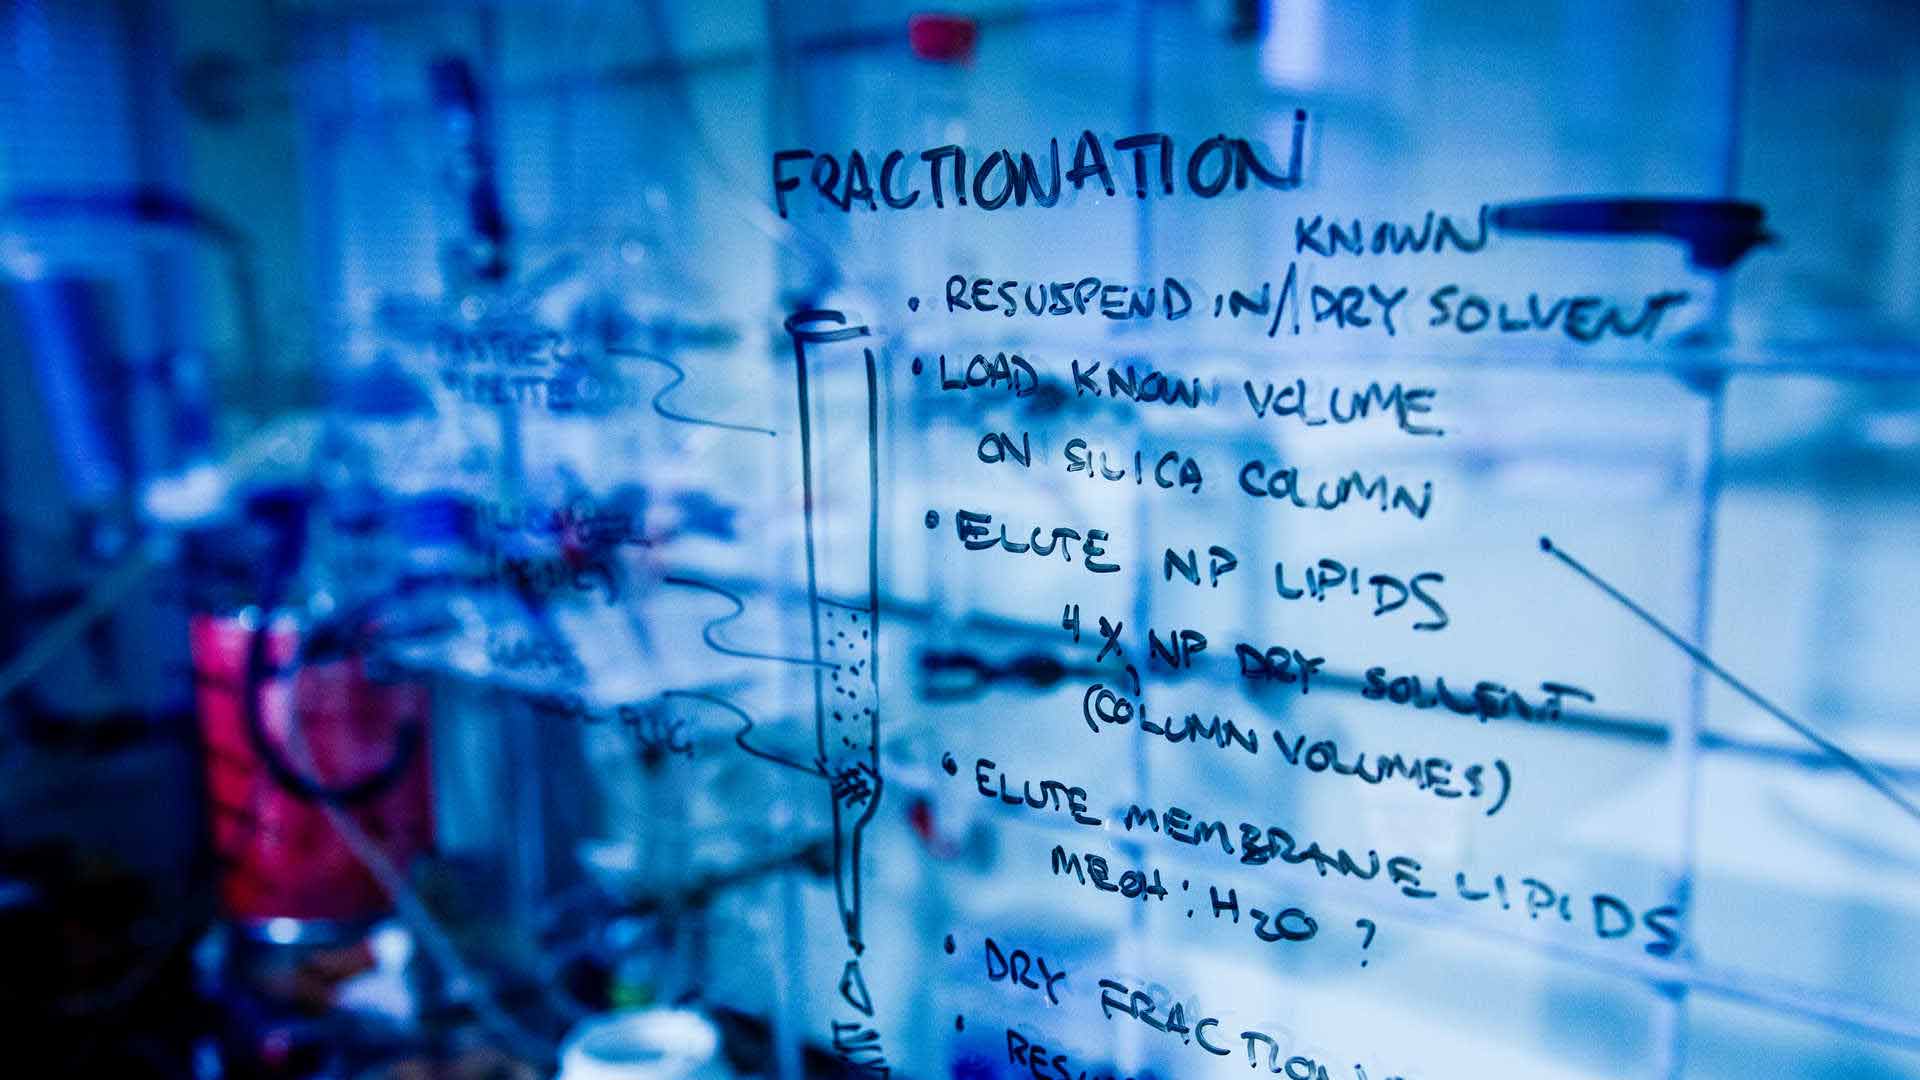 Notes written on a glass board in a laboratory